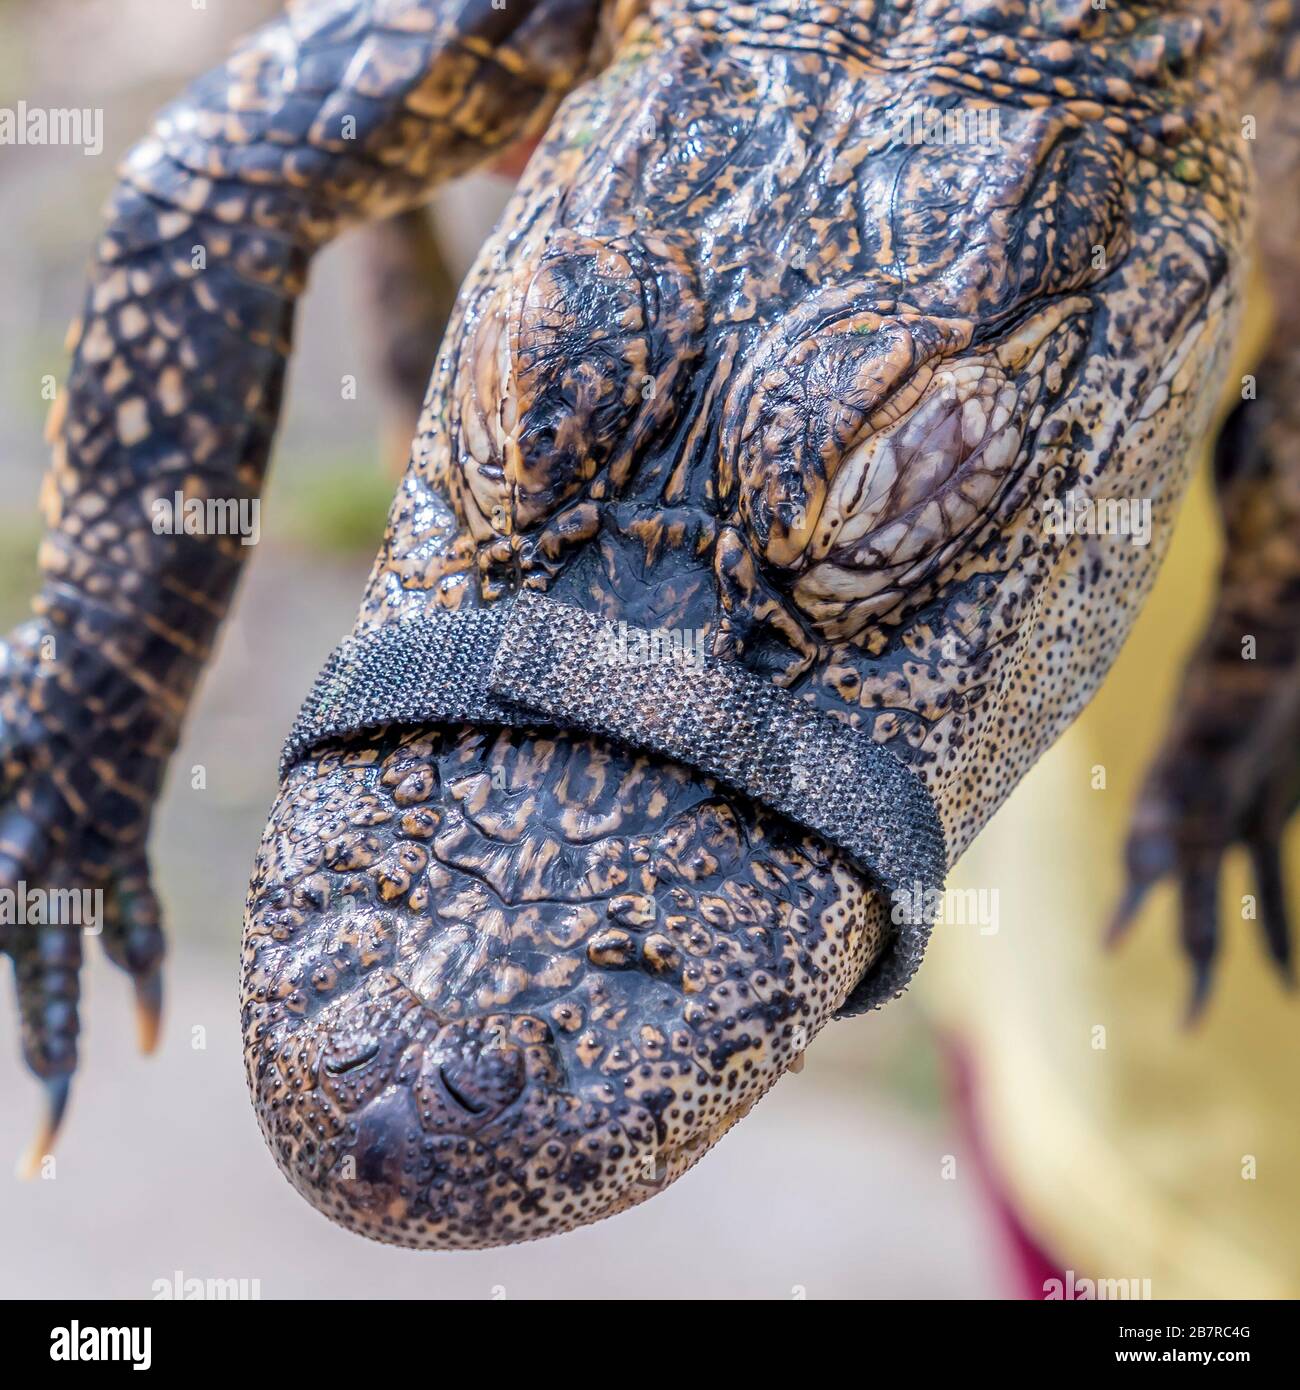 Closeup view of a baby alligator Stock Photo